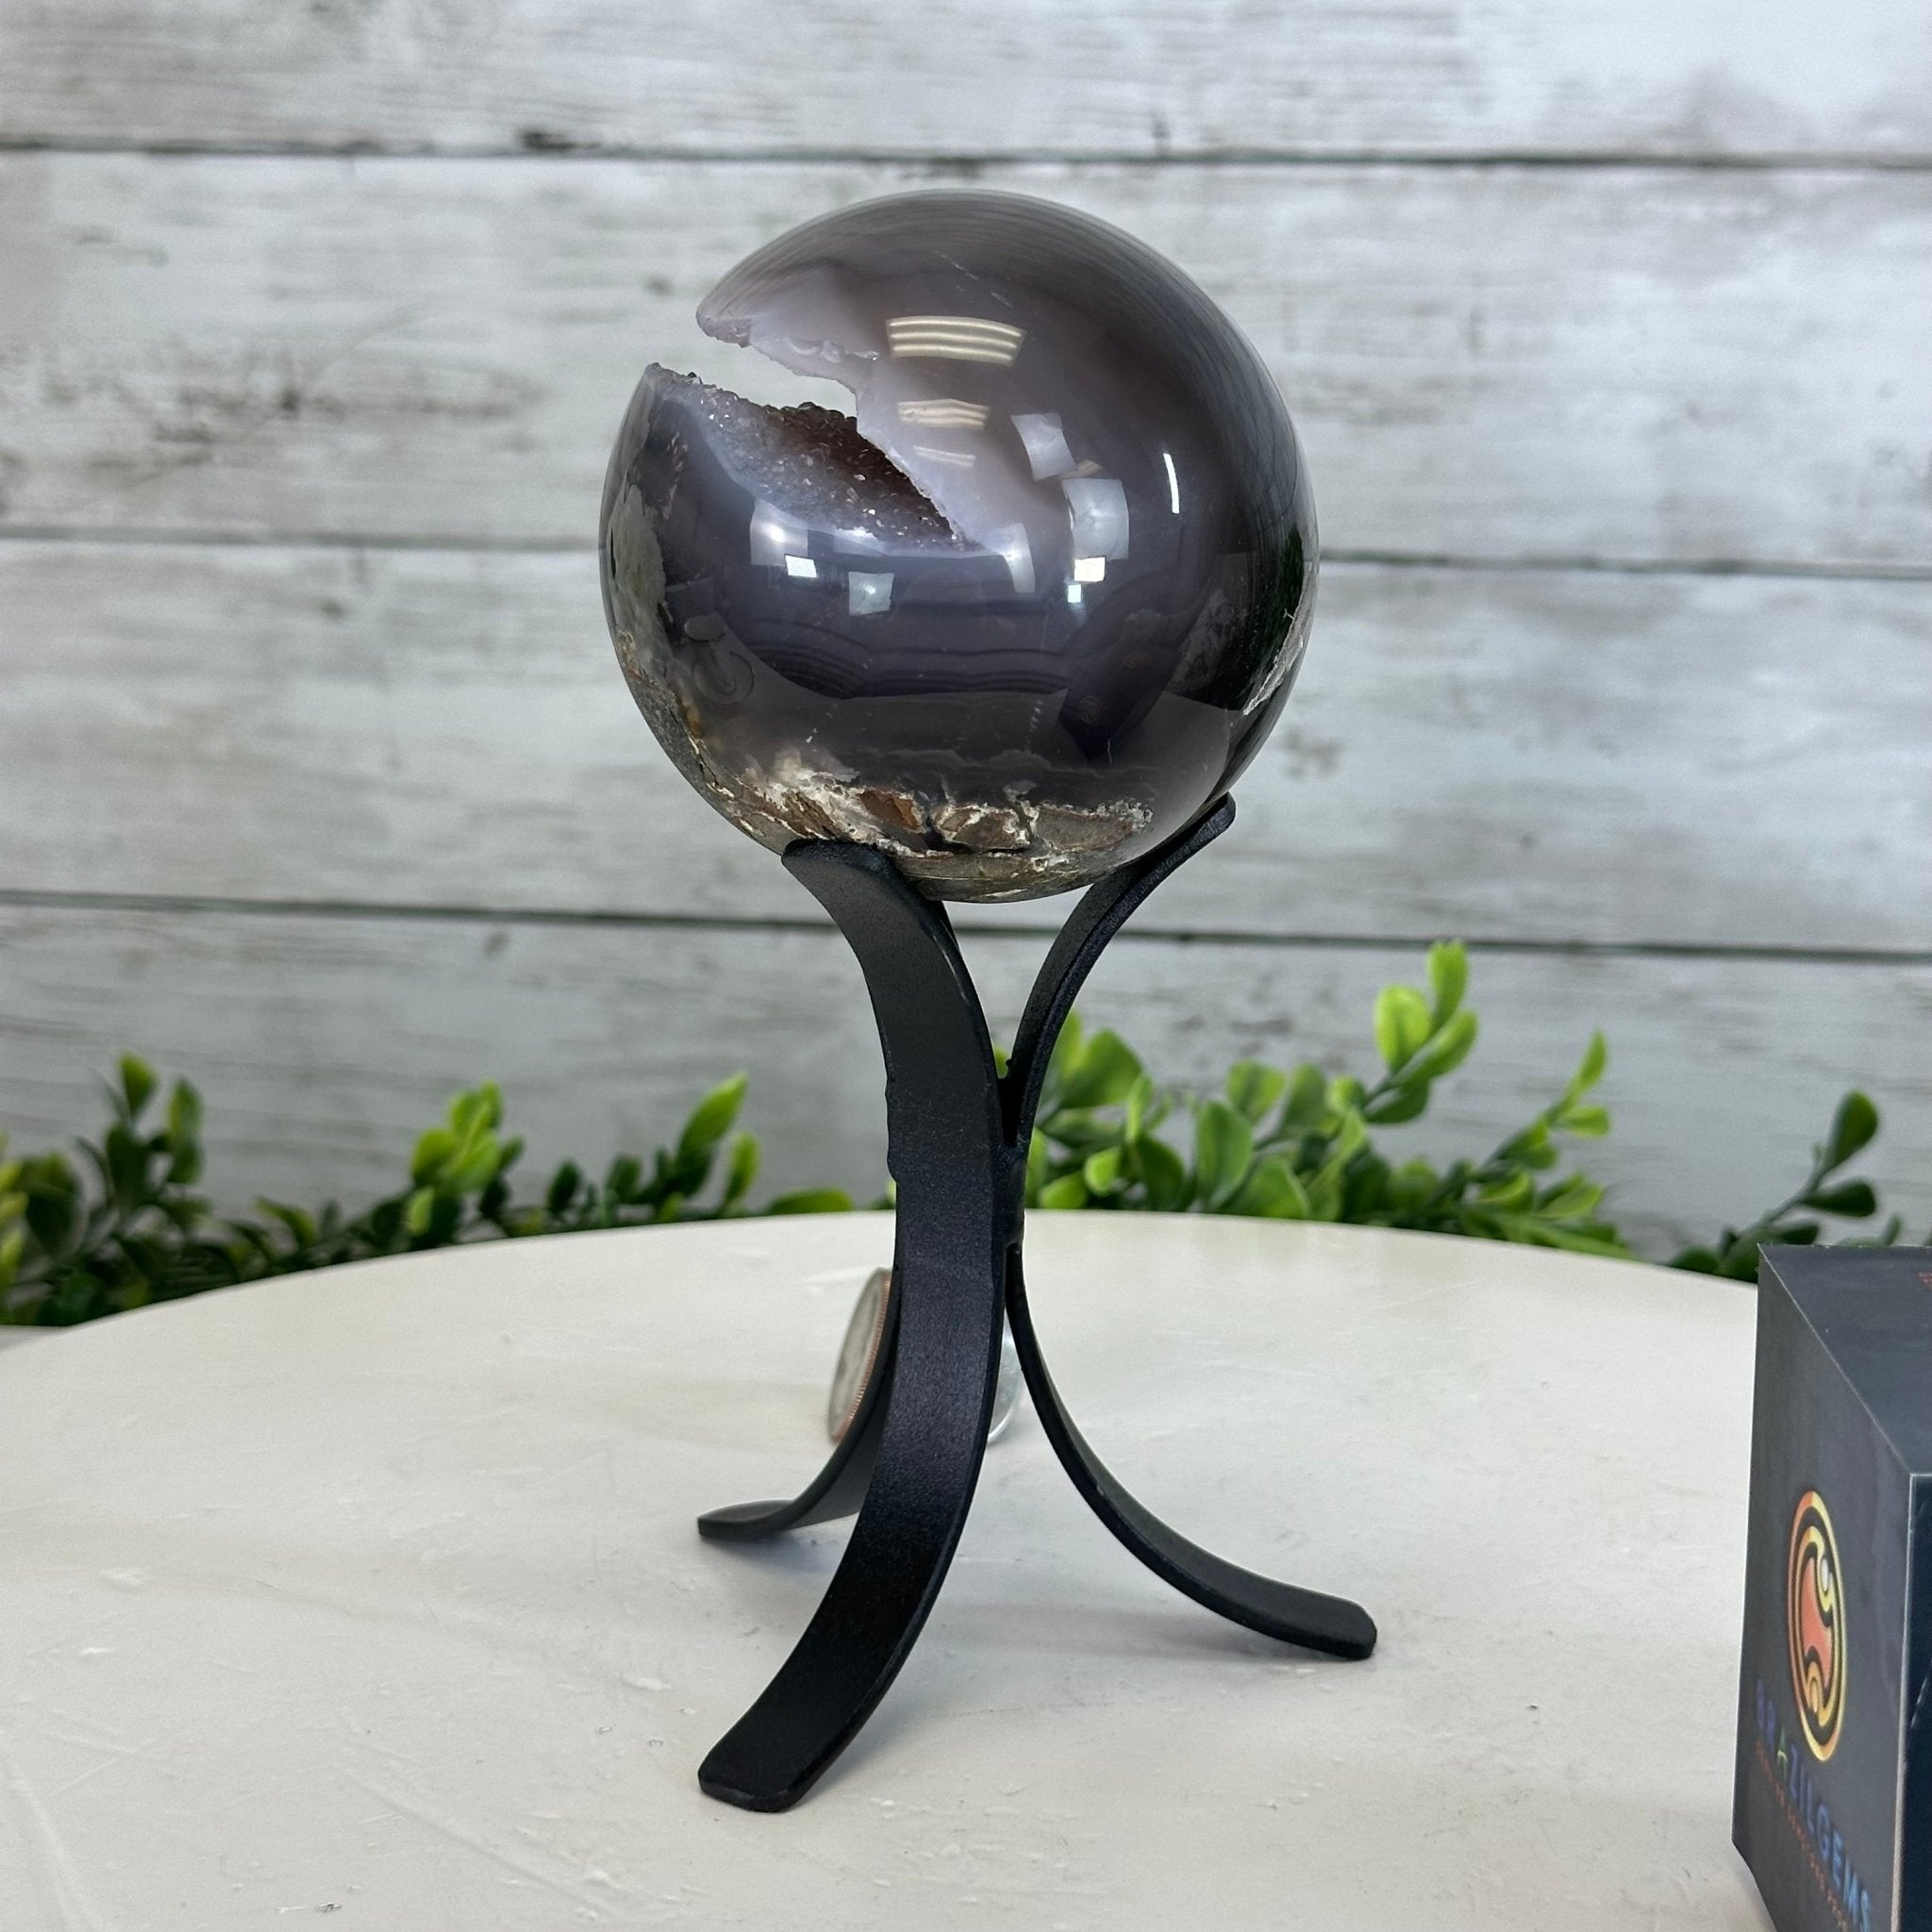 Druzy Agate Sphere on a Metal Stand, 1.3 lbs & 6.7" Tall #5634-0007 - Brazil GemsBrazil GemsDruzy Agate Sphere on a Metal Stand, 1.3 lbs & 6.7" Tall #5634-0007Spheres5634-0007